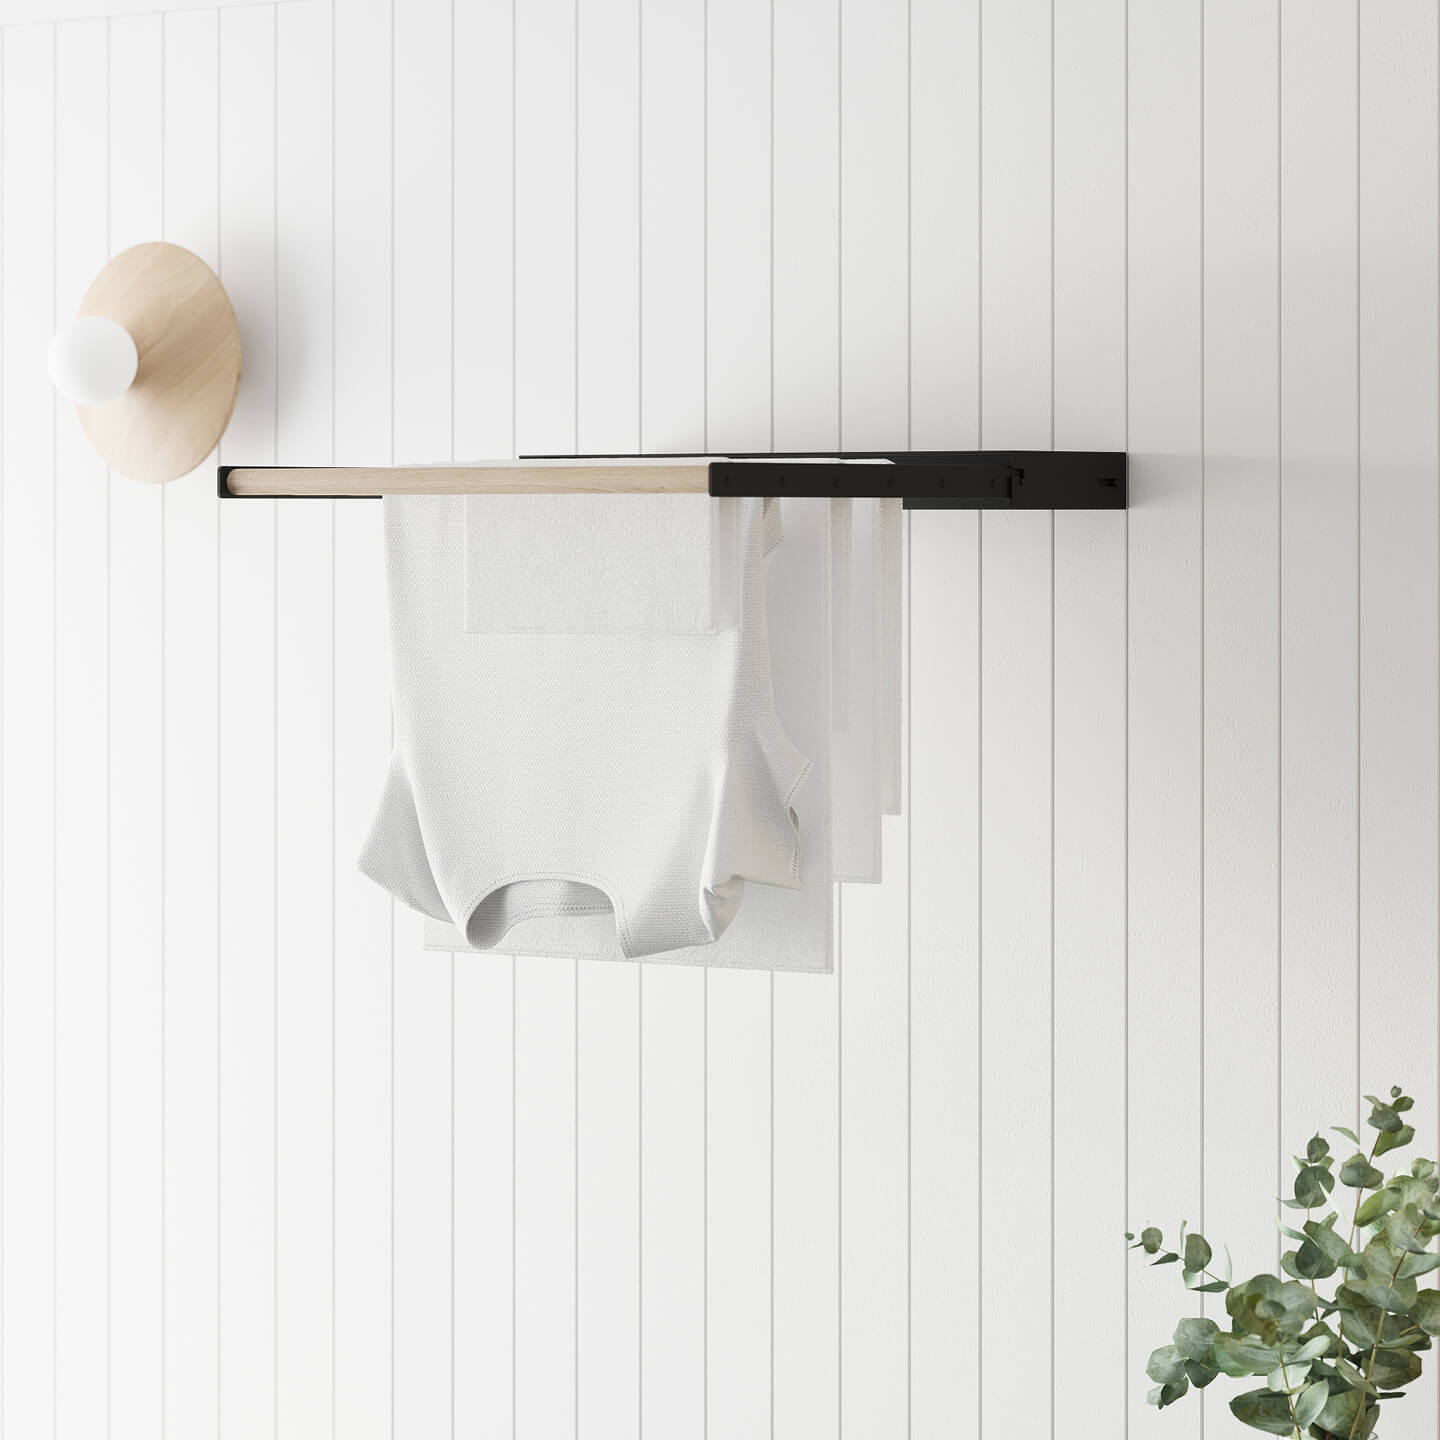 Wall Mounted Drying Rack, Wall Mounted Clothes Drying Rack, Wall Mounted Clothes Airer